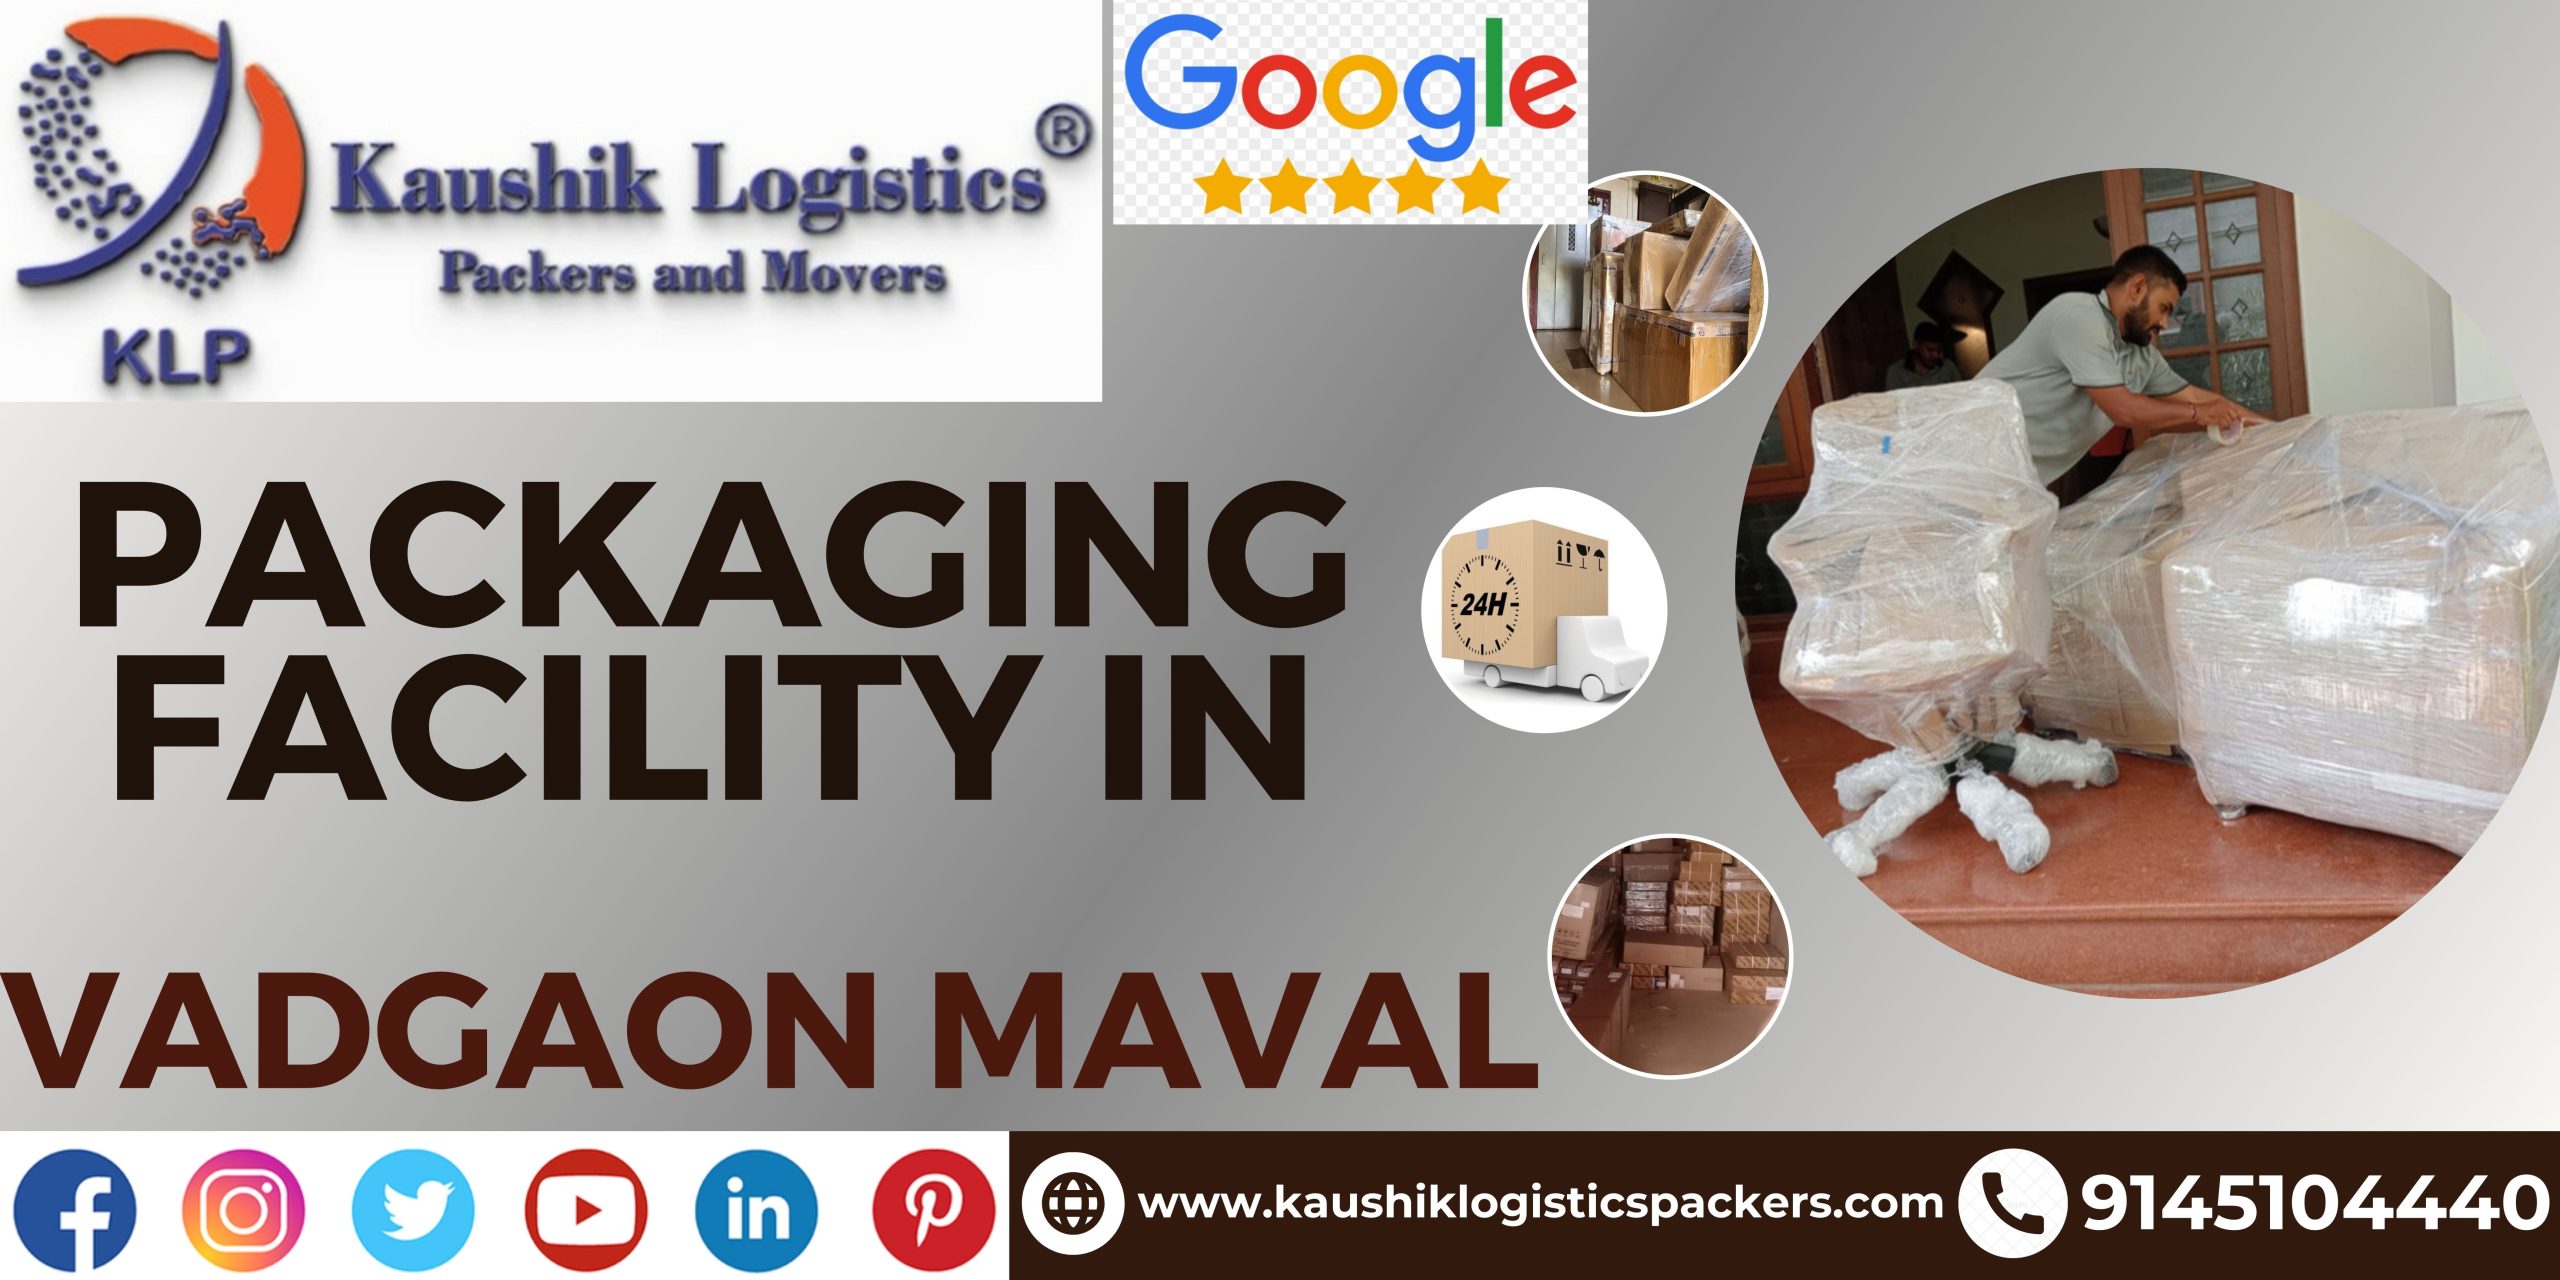 Packers and Movers In Vadgaon Maval